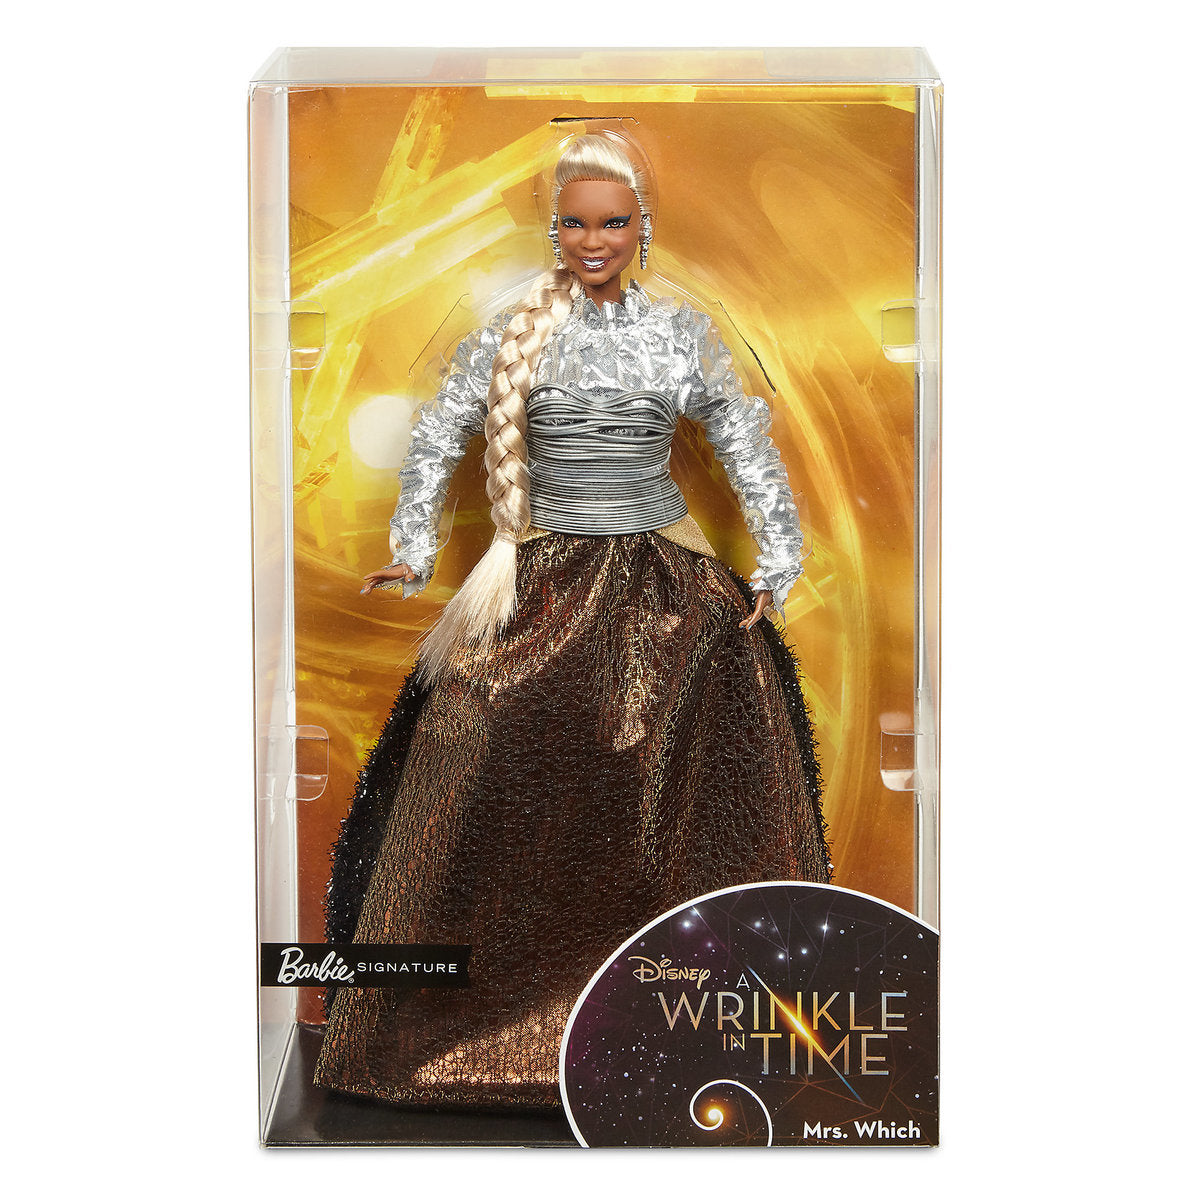 Disney Mrs. Which Doll Live Action Film A Wrinkle in Time Barbie Doll New Box